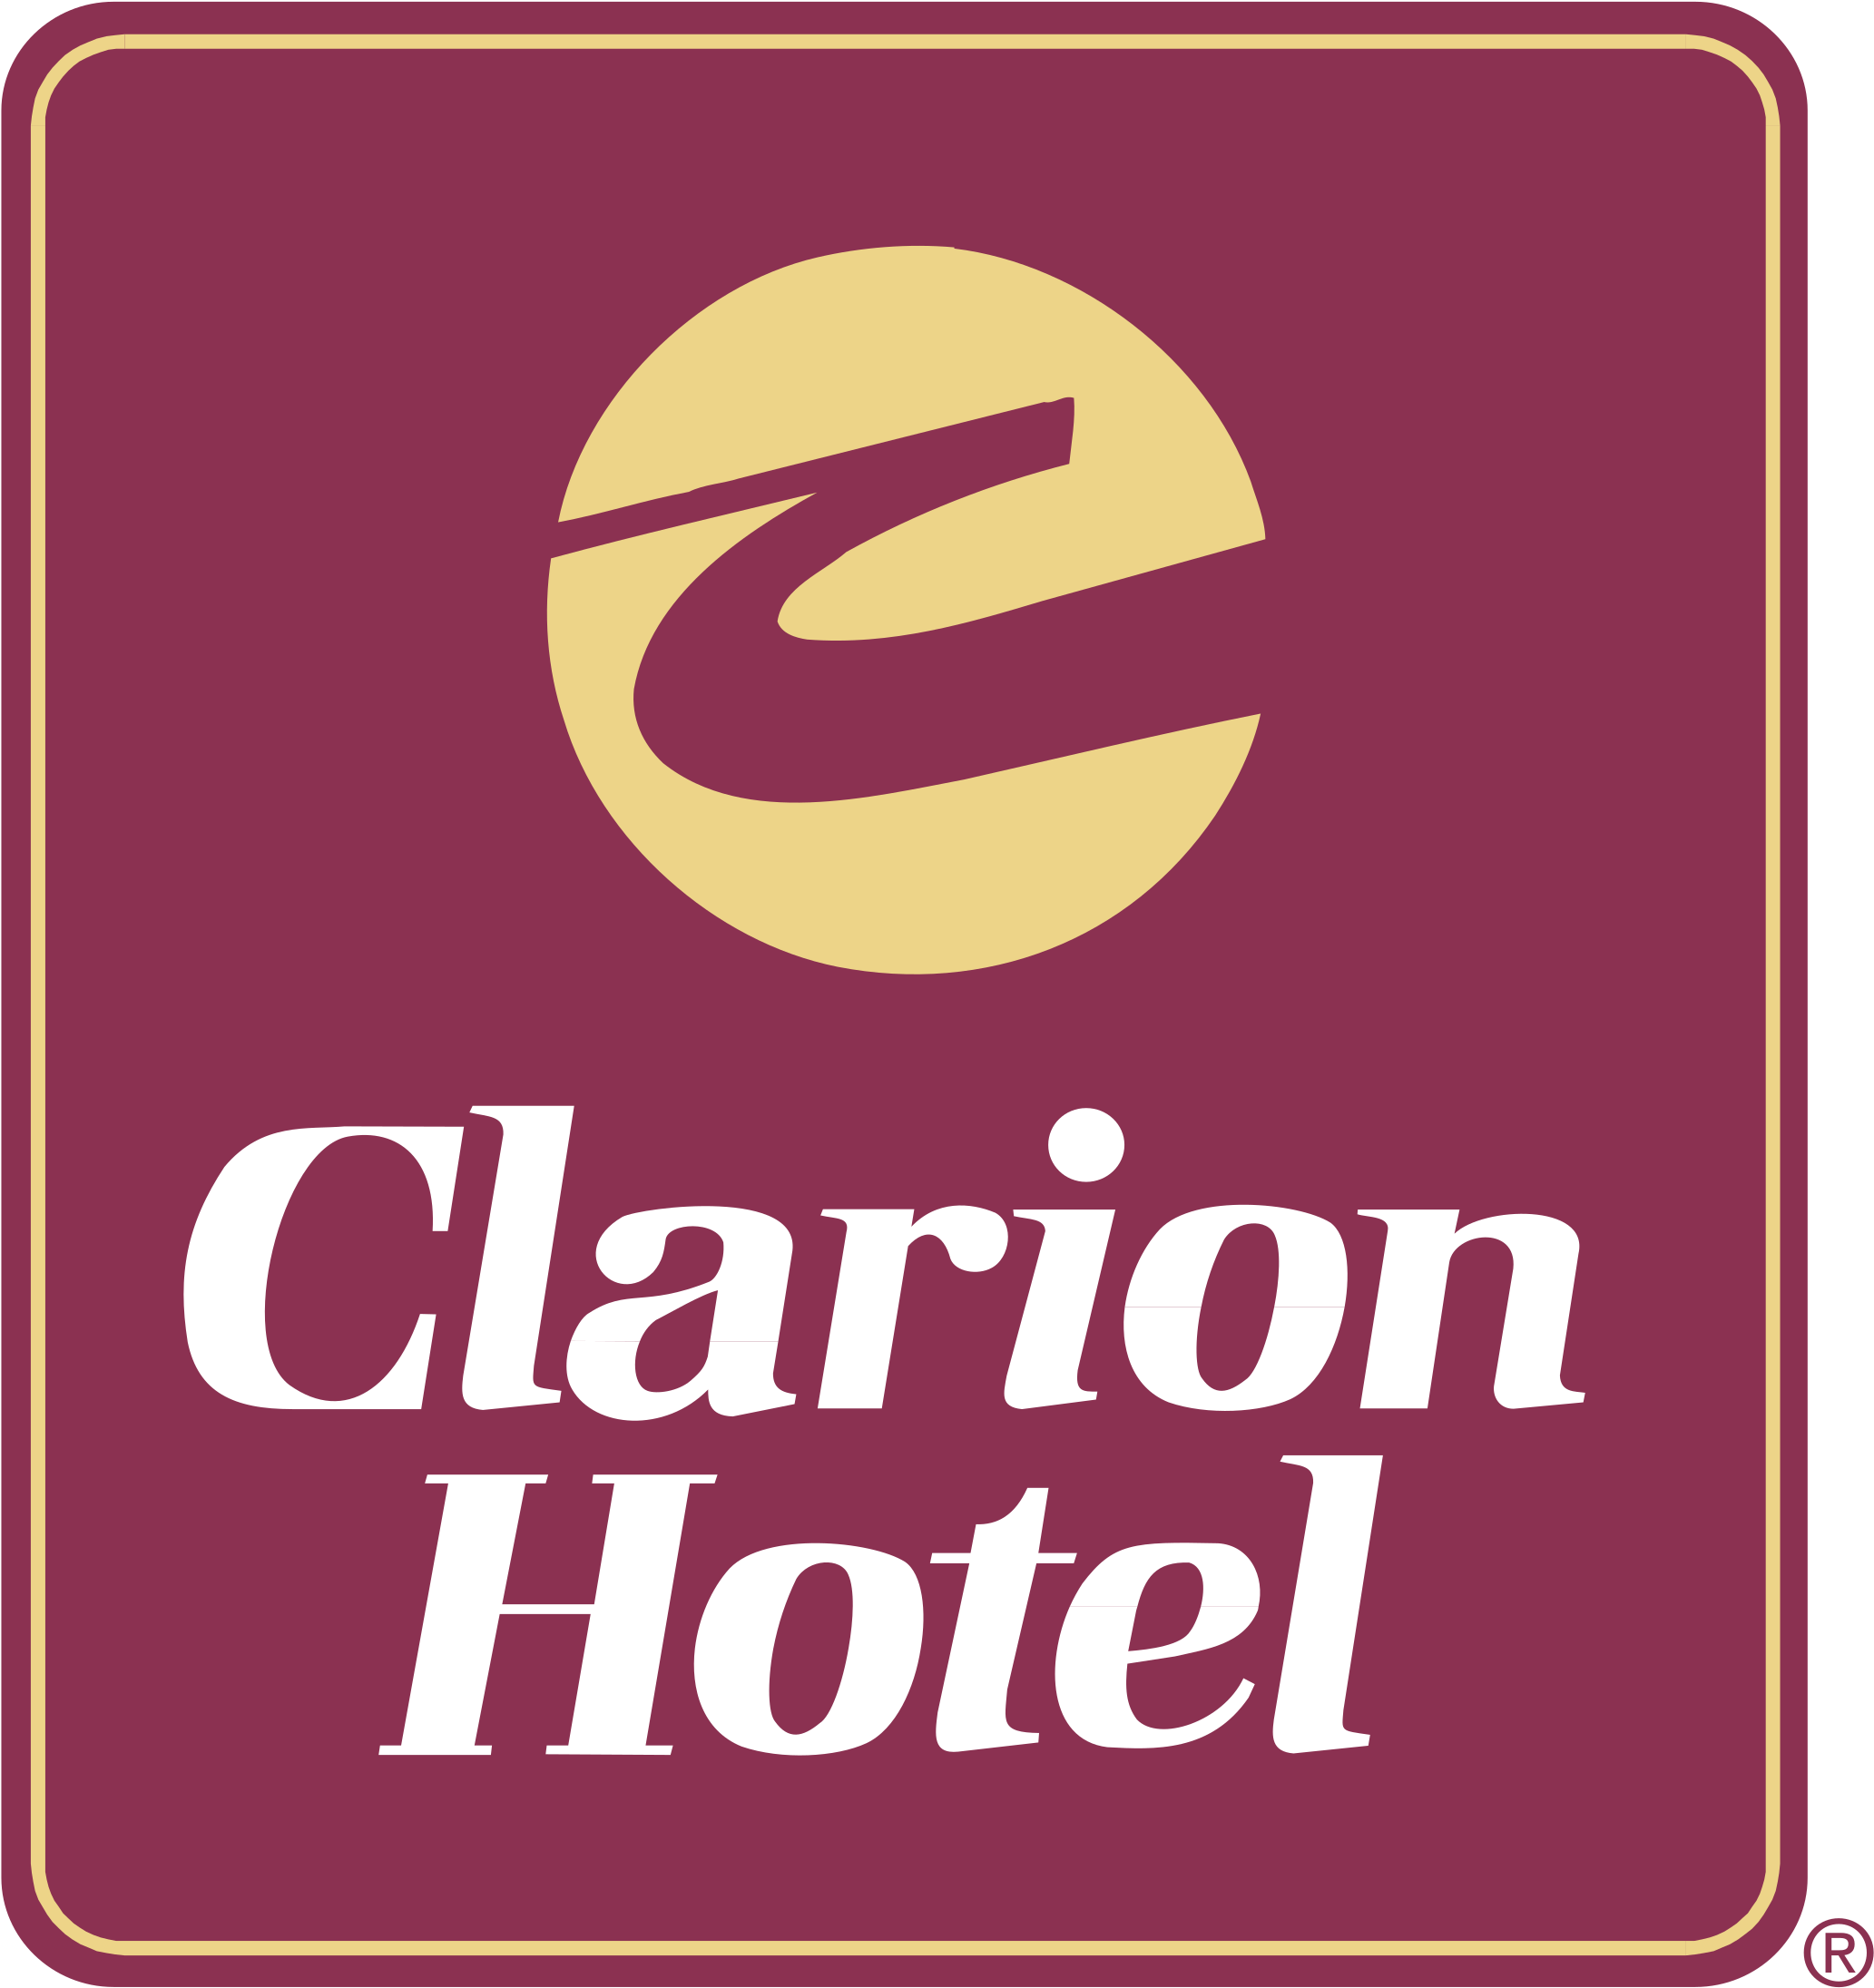 Clarion Hotel Logo Png Transparent - Clarion Hotel Logo (2400x2400), Png Download